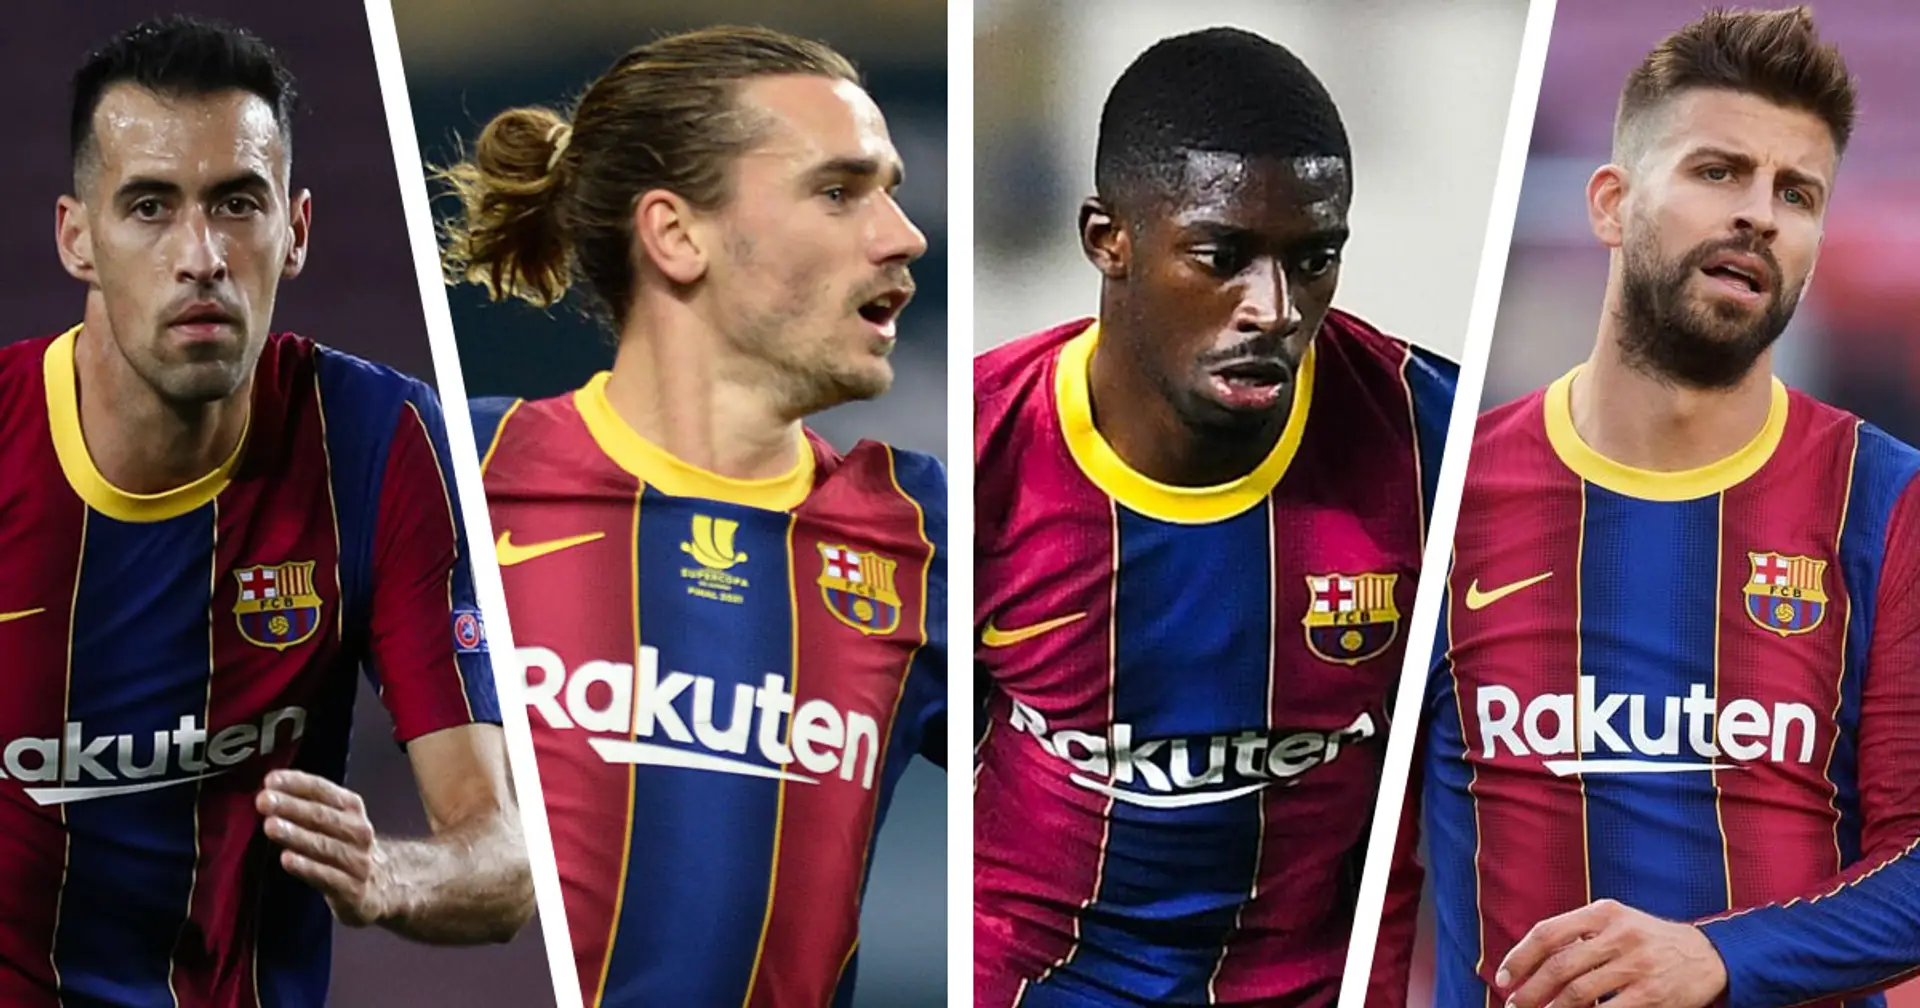 Griezmann and Dembele among 13 players that could leave Barca this summer (reliability: 4 stars)